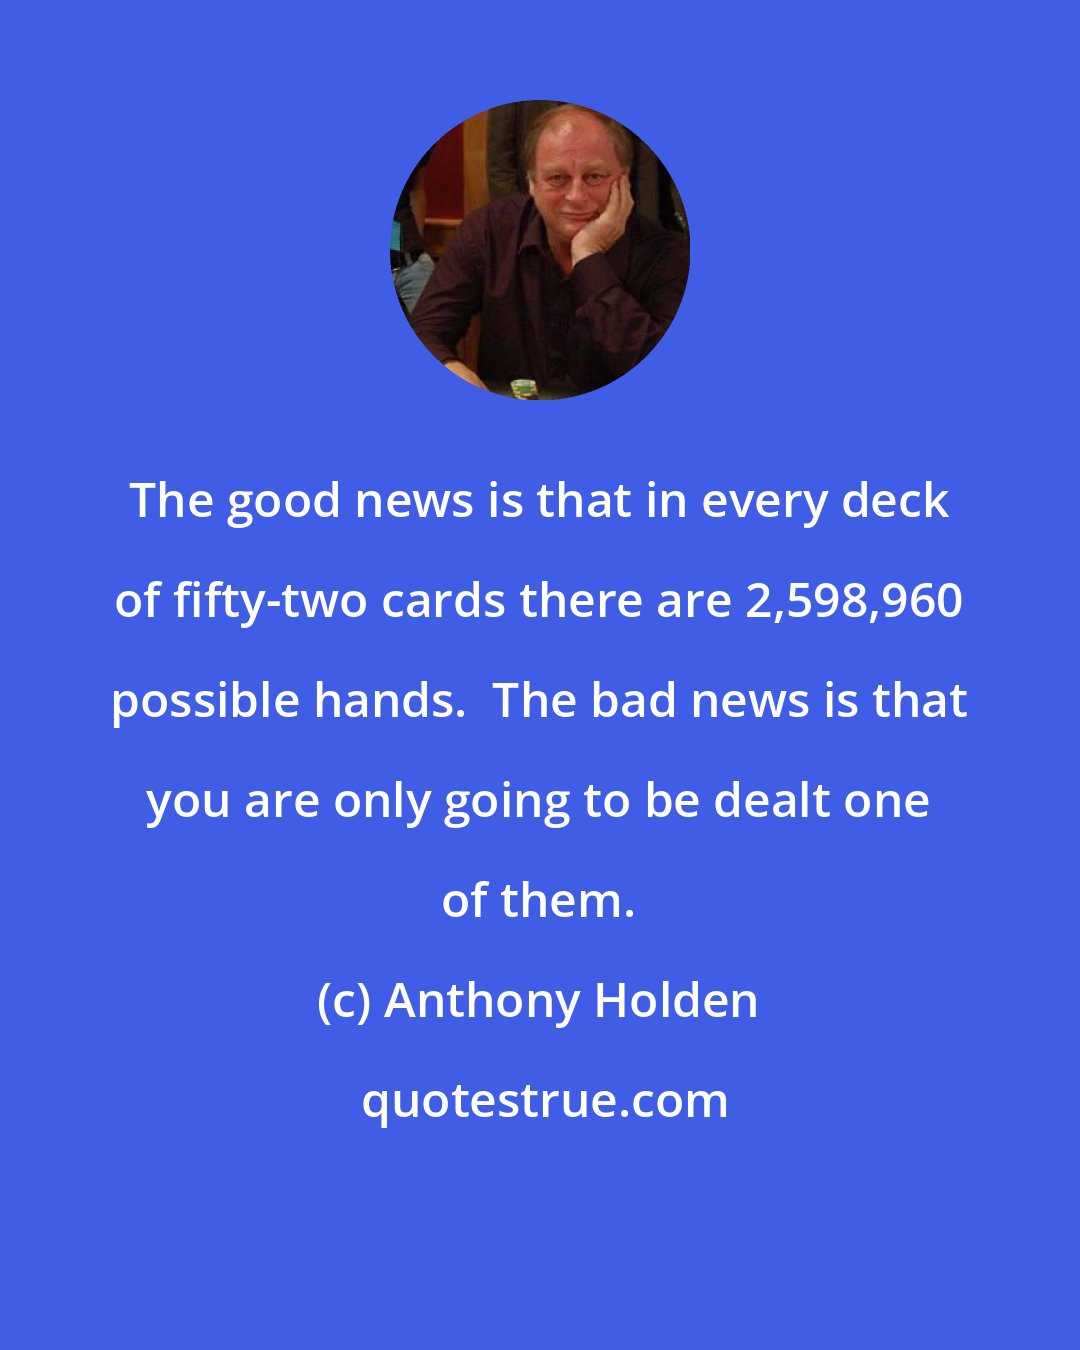 Anthony Holden: The good news is that in every deck of fifty-two cards there are 2,598,960 possible hands.  The bad news is that you are only going to be dealt one of them.